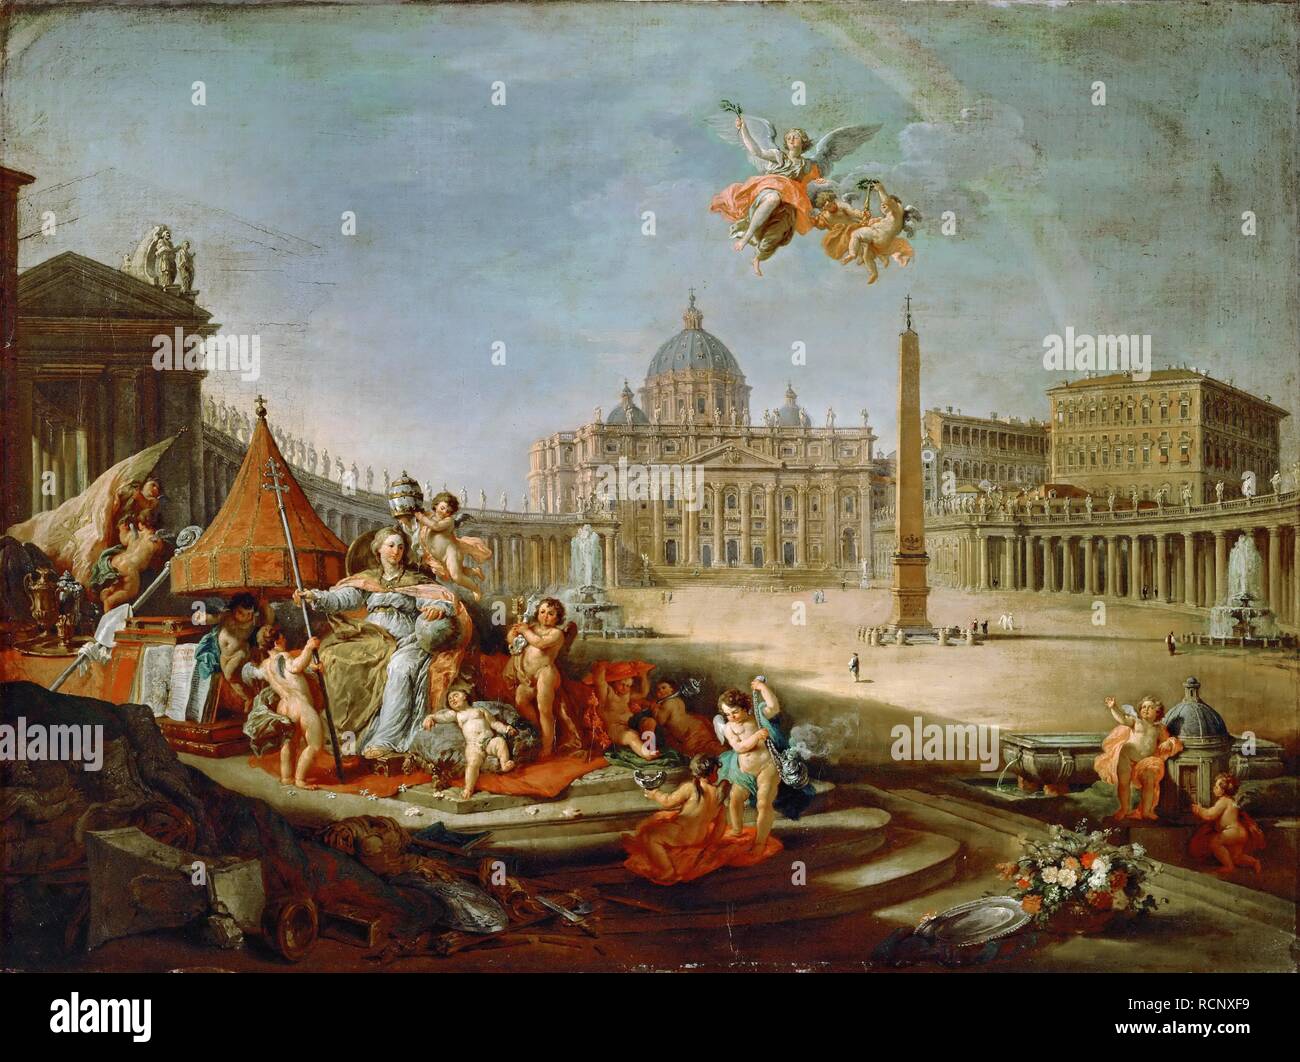 Piazza San Pietro, Rome with an allegory of the Triumph of the Papacy. Museum: Musee du Louvre, Paris. Author: PANINI, GIOVANNI PAOLO. Stock Photo